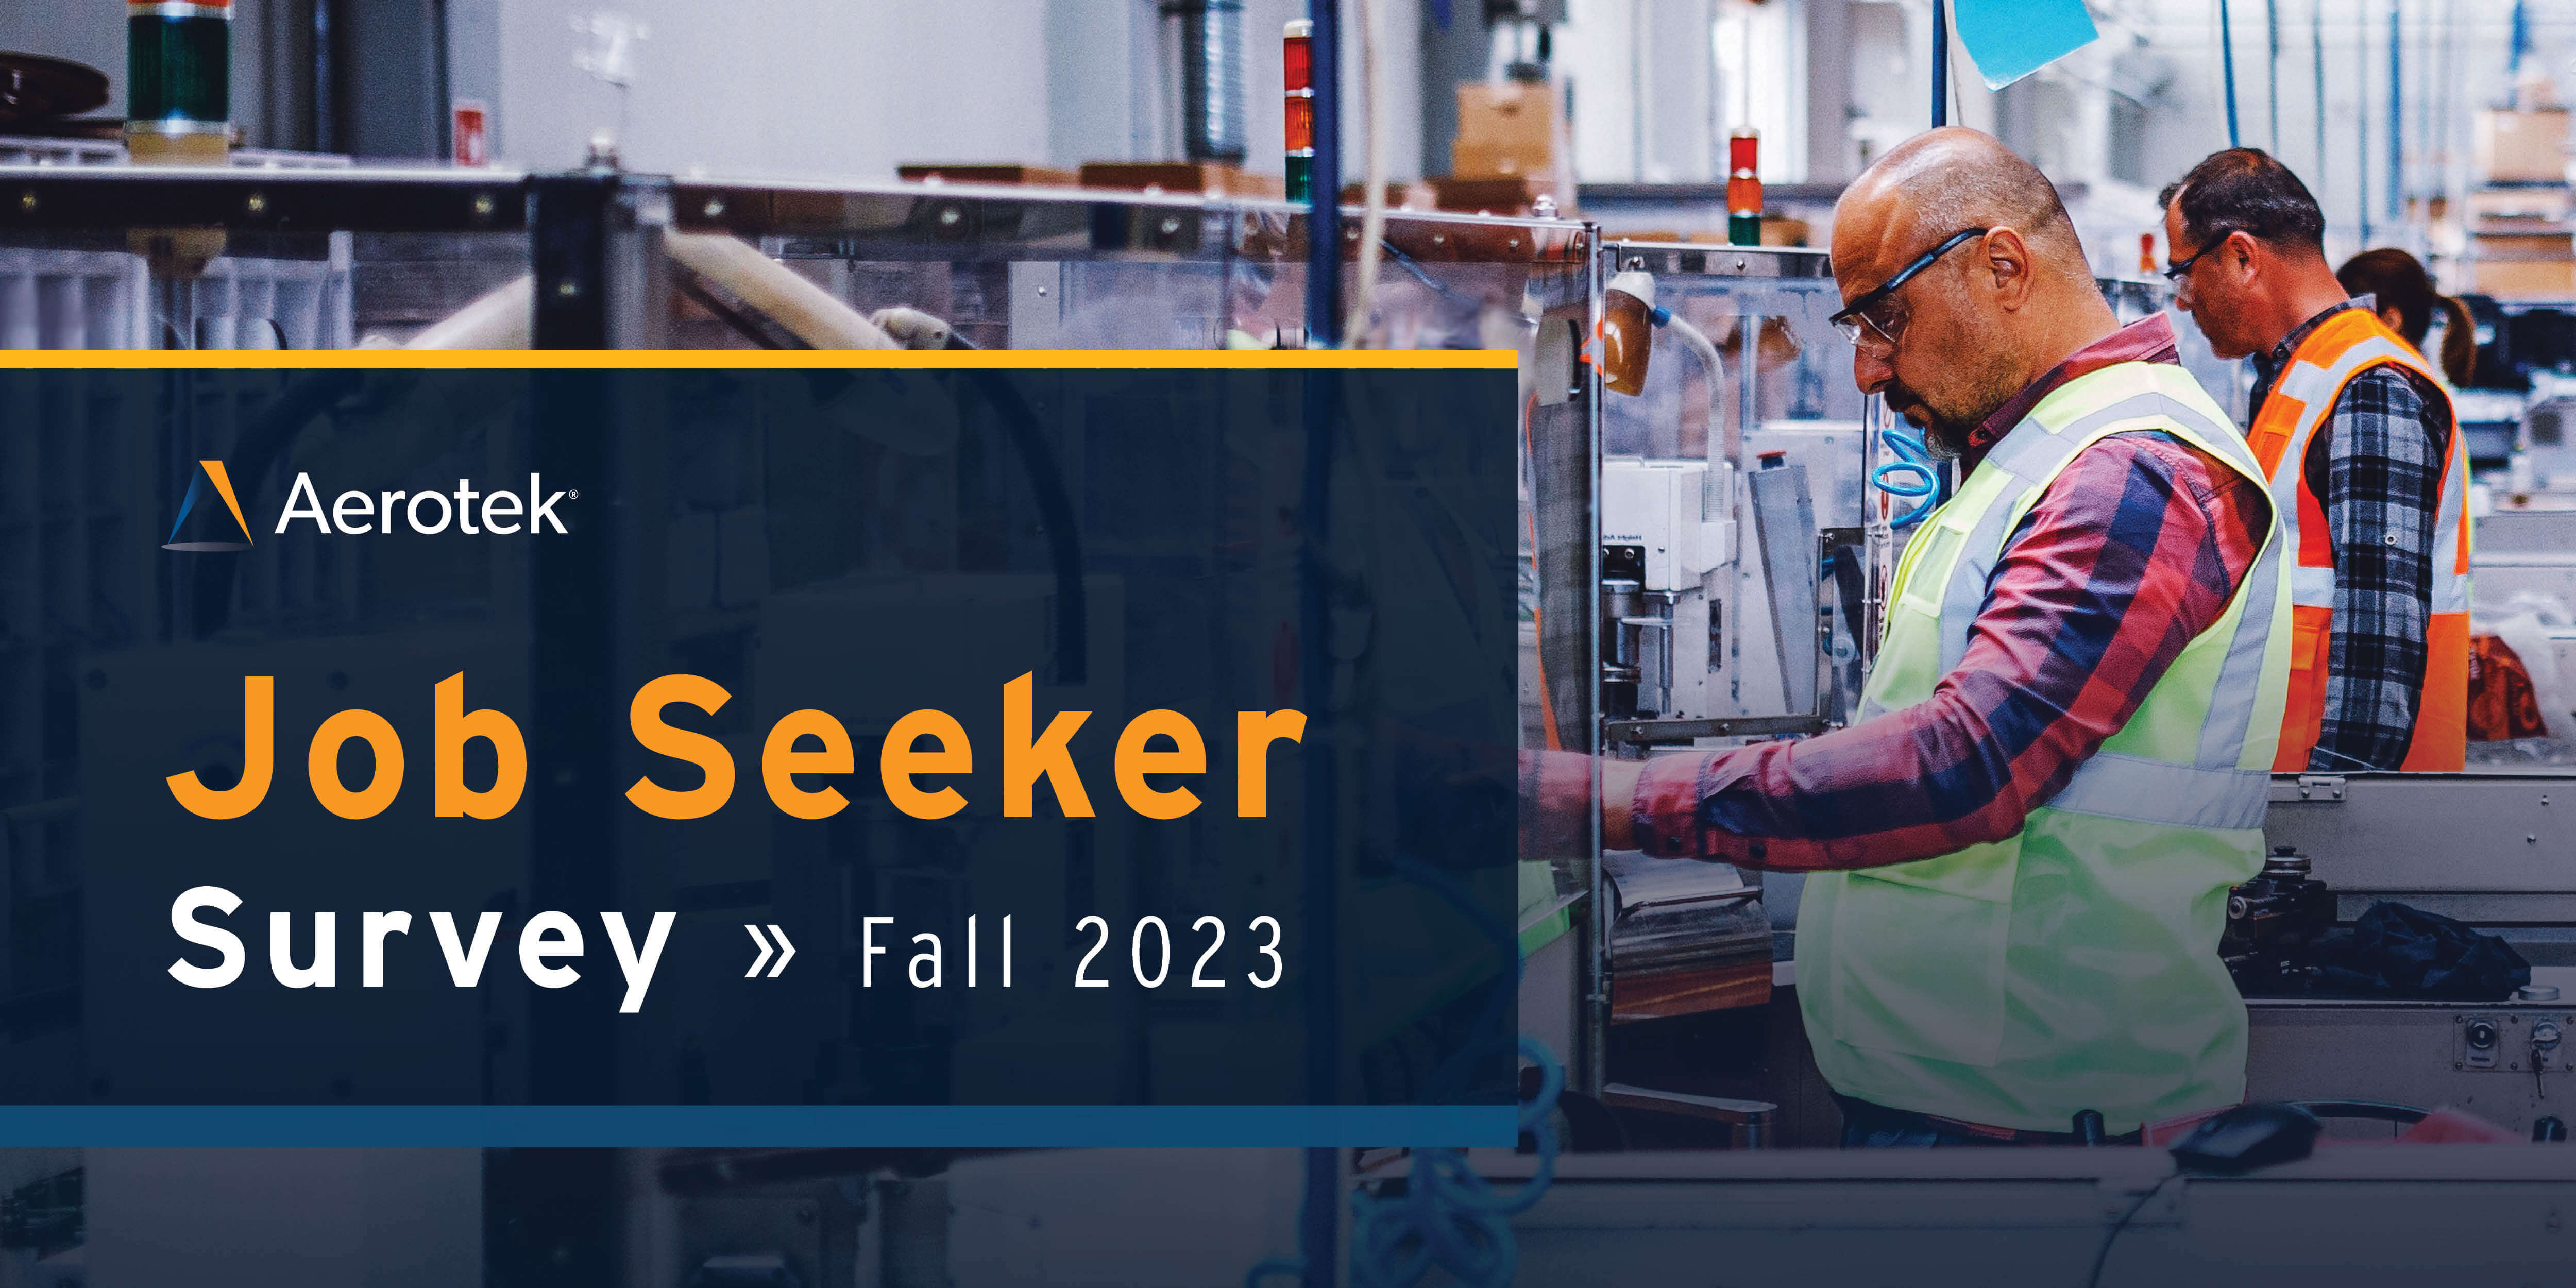 A man in a yellow vest and protective glasses works on an assembly line, and text reads "Job Seeker Survey: Fall 2023"